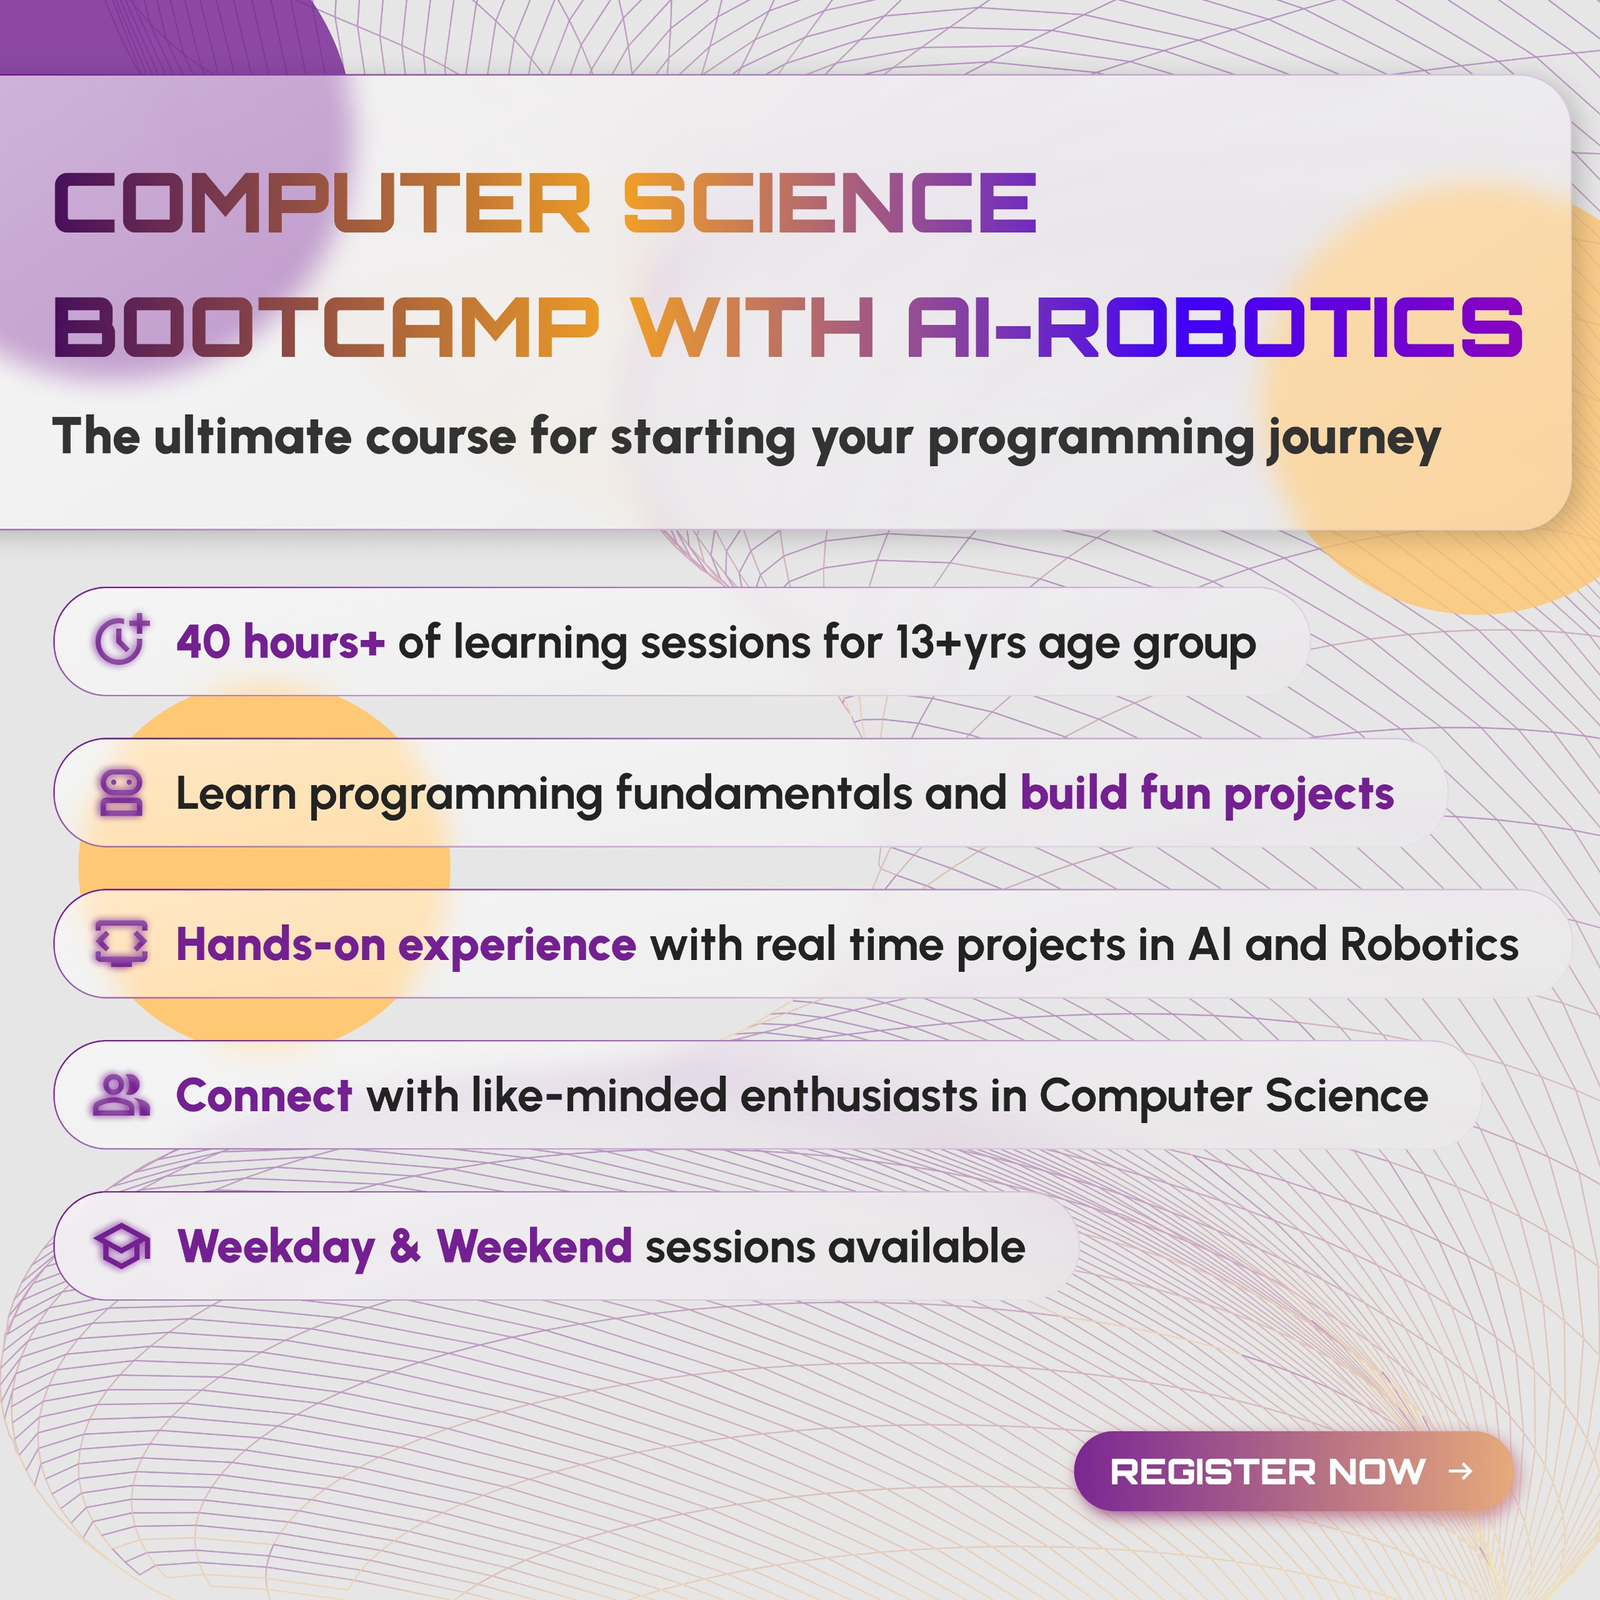 Computer Science Bootcamp is designed with a CBSE-based curriculum, ensuring a comprehensive learning experience aligned with the standards set by the Central Board of Secondary Education.